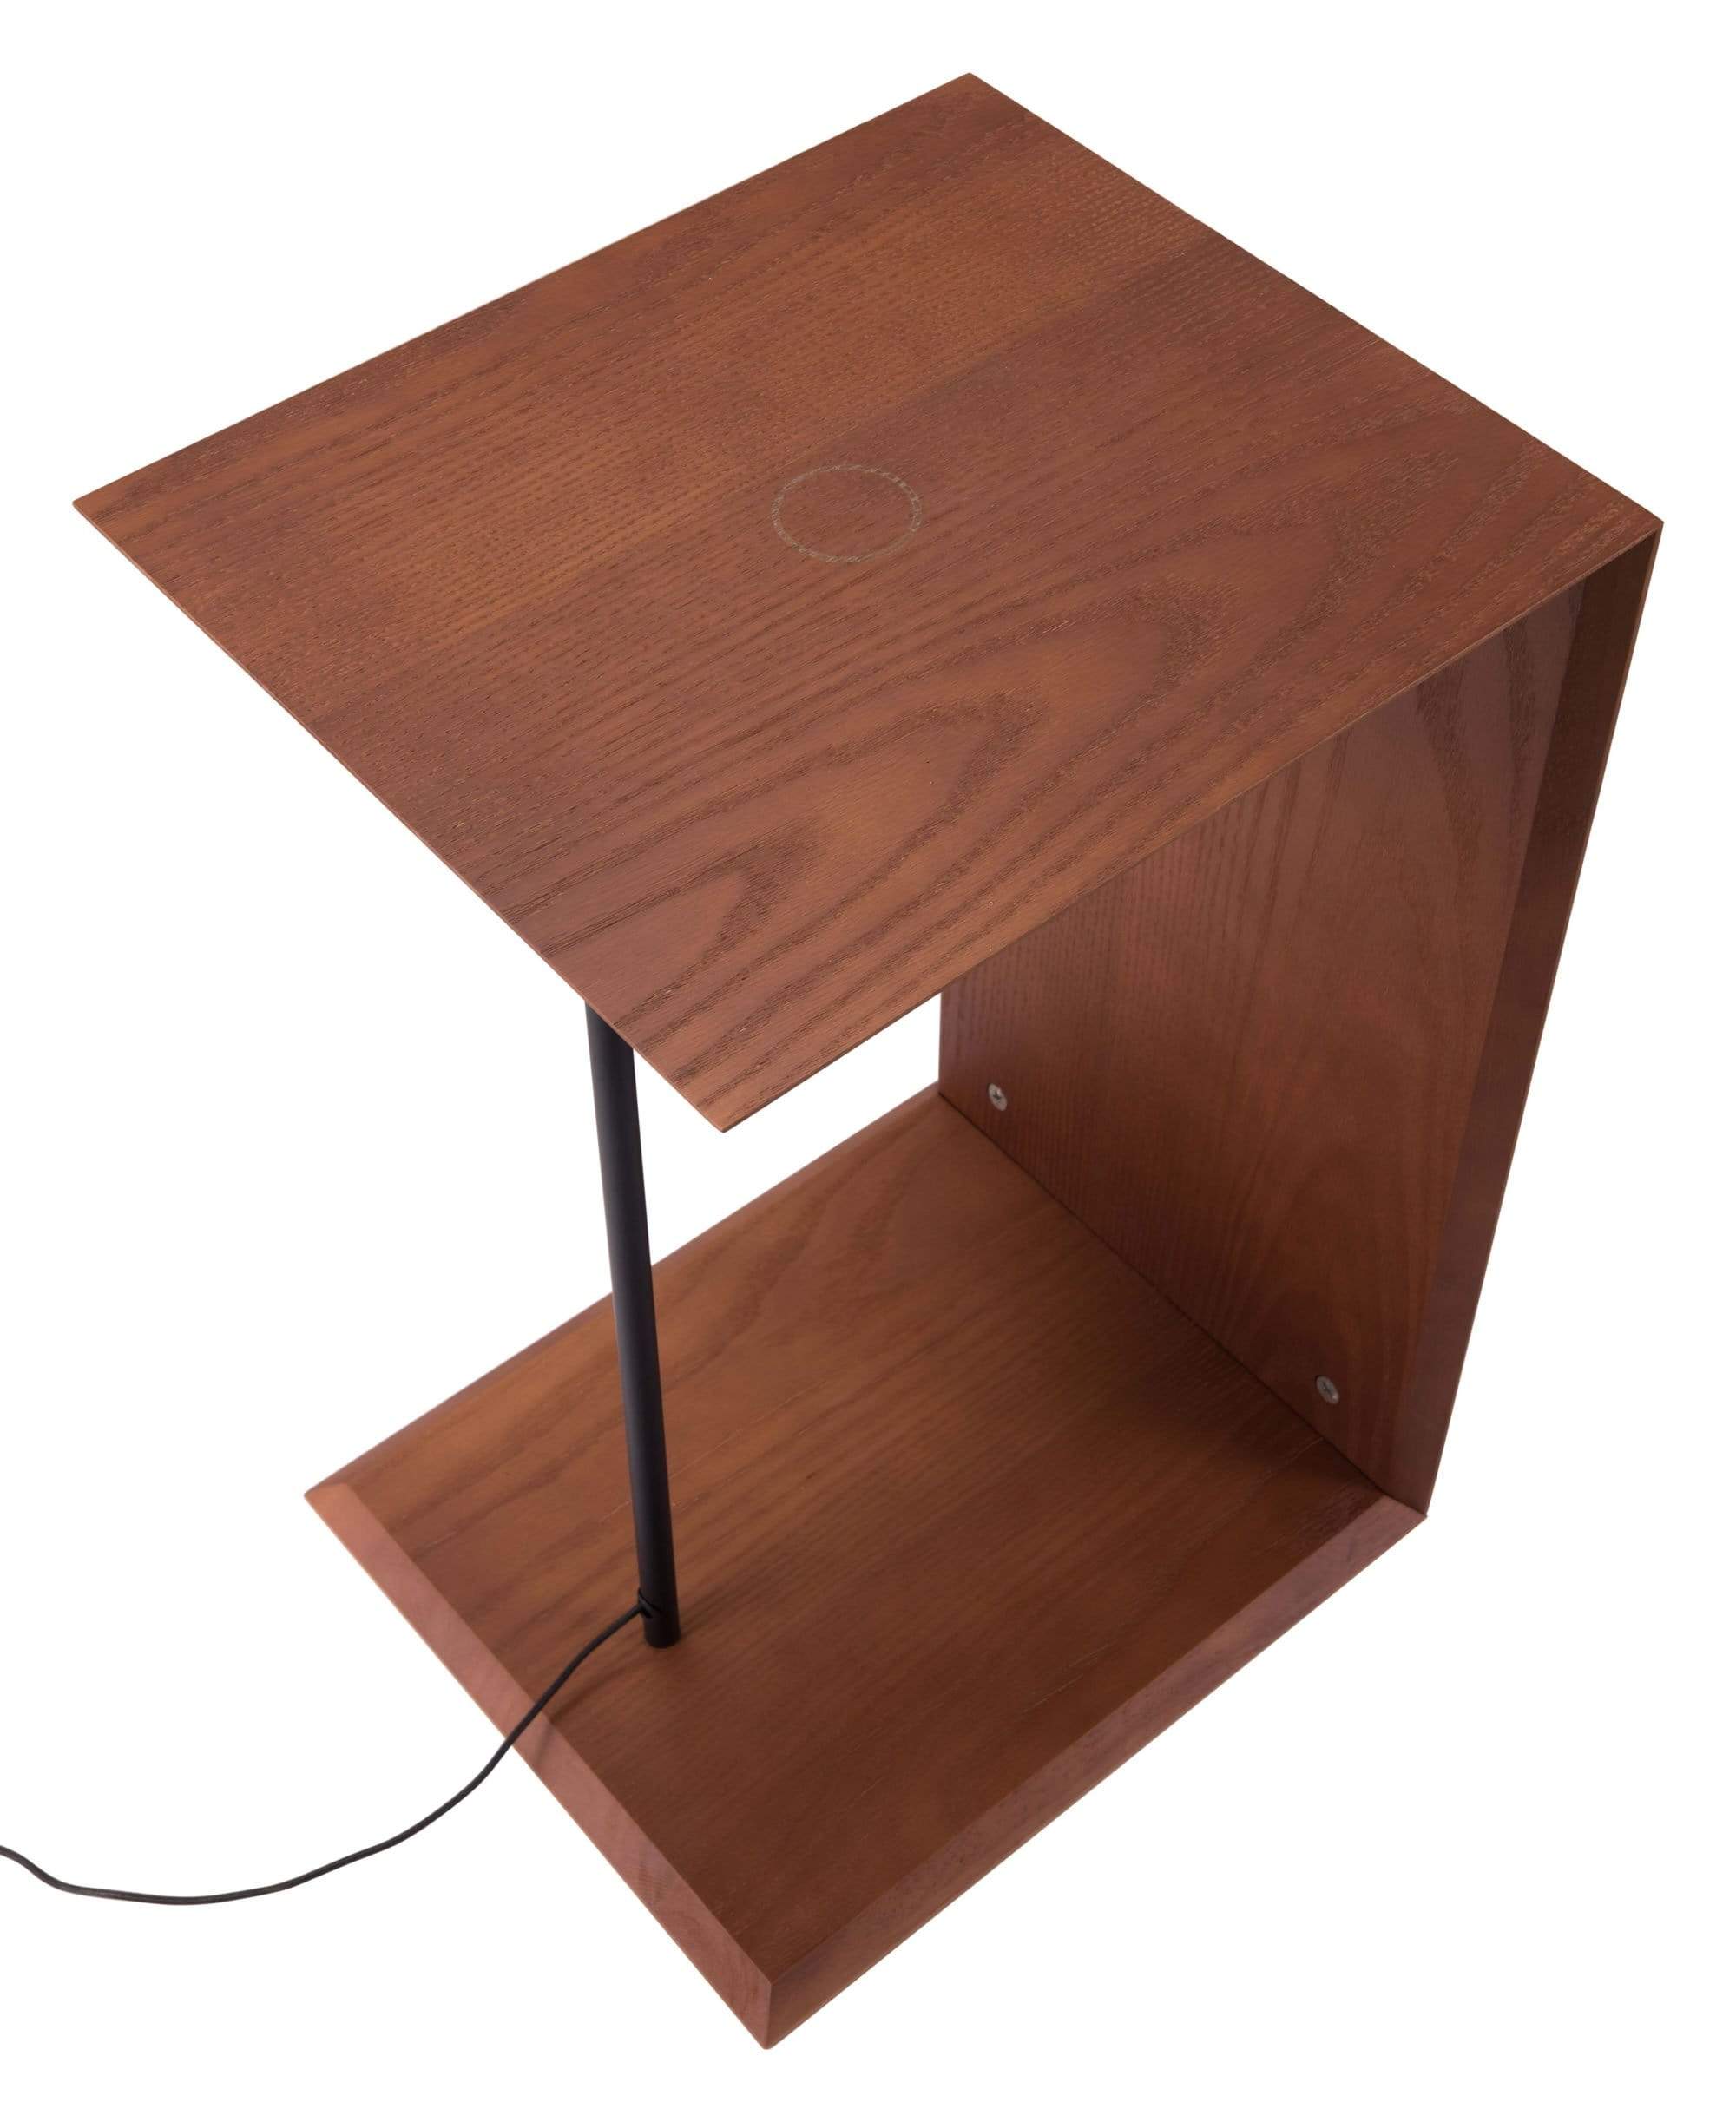 HomeRoots Outdoors Outdoor Furniture > Outdoor Tables Walnut / Ash Wood, Painted Steel, MDF 13.8" x 15" x 24.2" Walnut, Ash Wood, Painted Steel, MDF, Wireless Charging Side Table